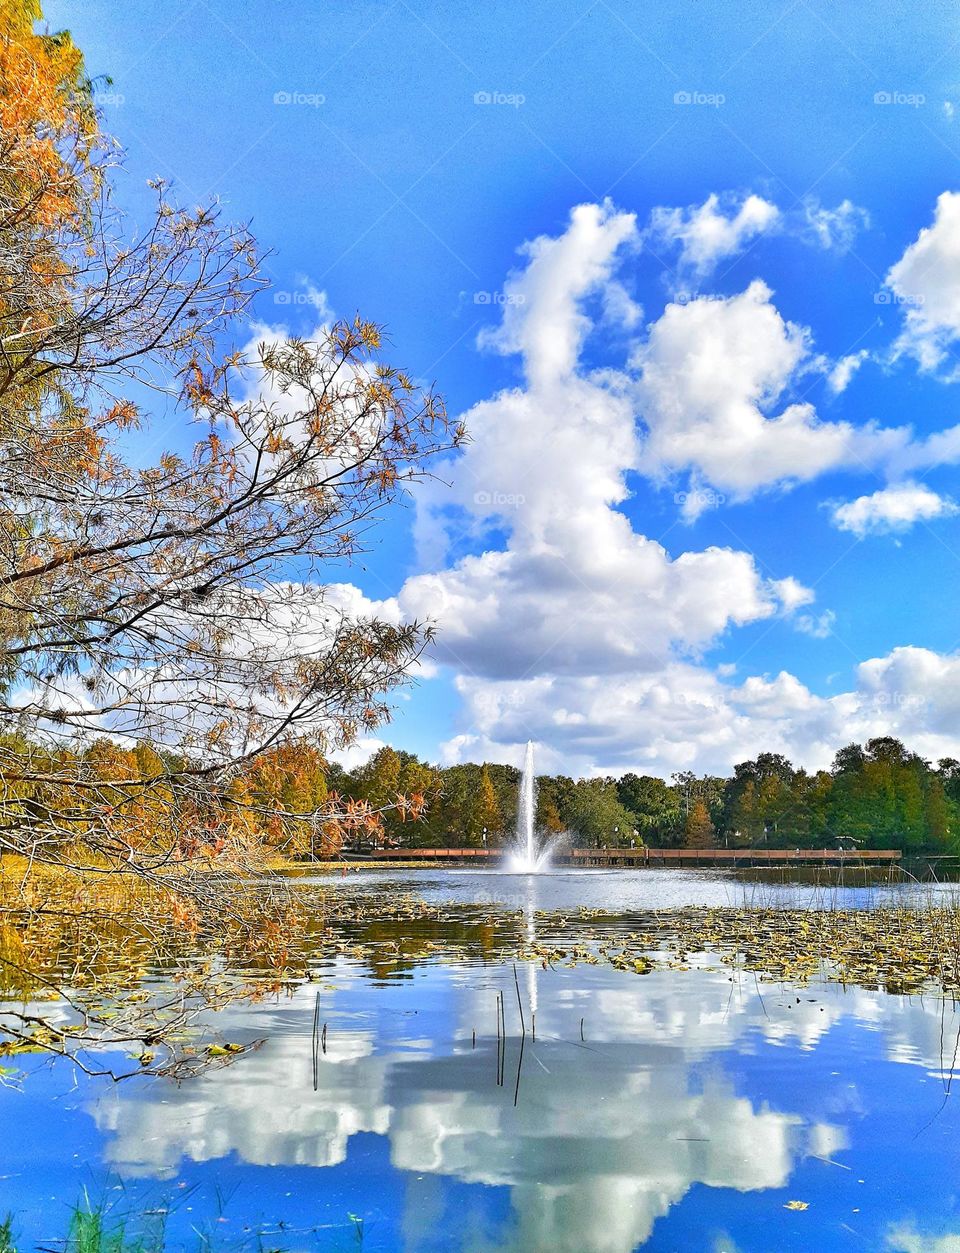 A beautiful landscape photo with blue sky and white clouds that in reflected in the water. There is a fountain in the middle of the lake. And trees with fall colors to the left of the picture and green trees across the lake at Lake Lily Park.